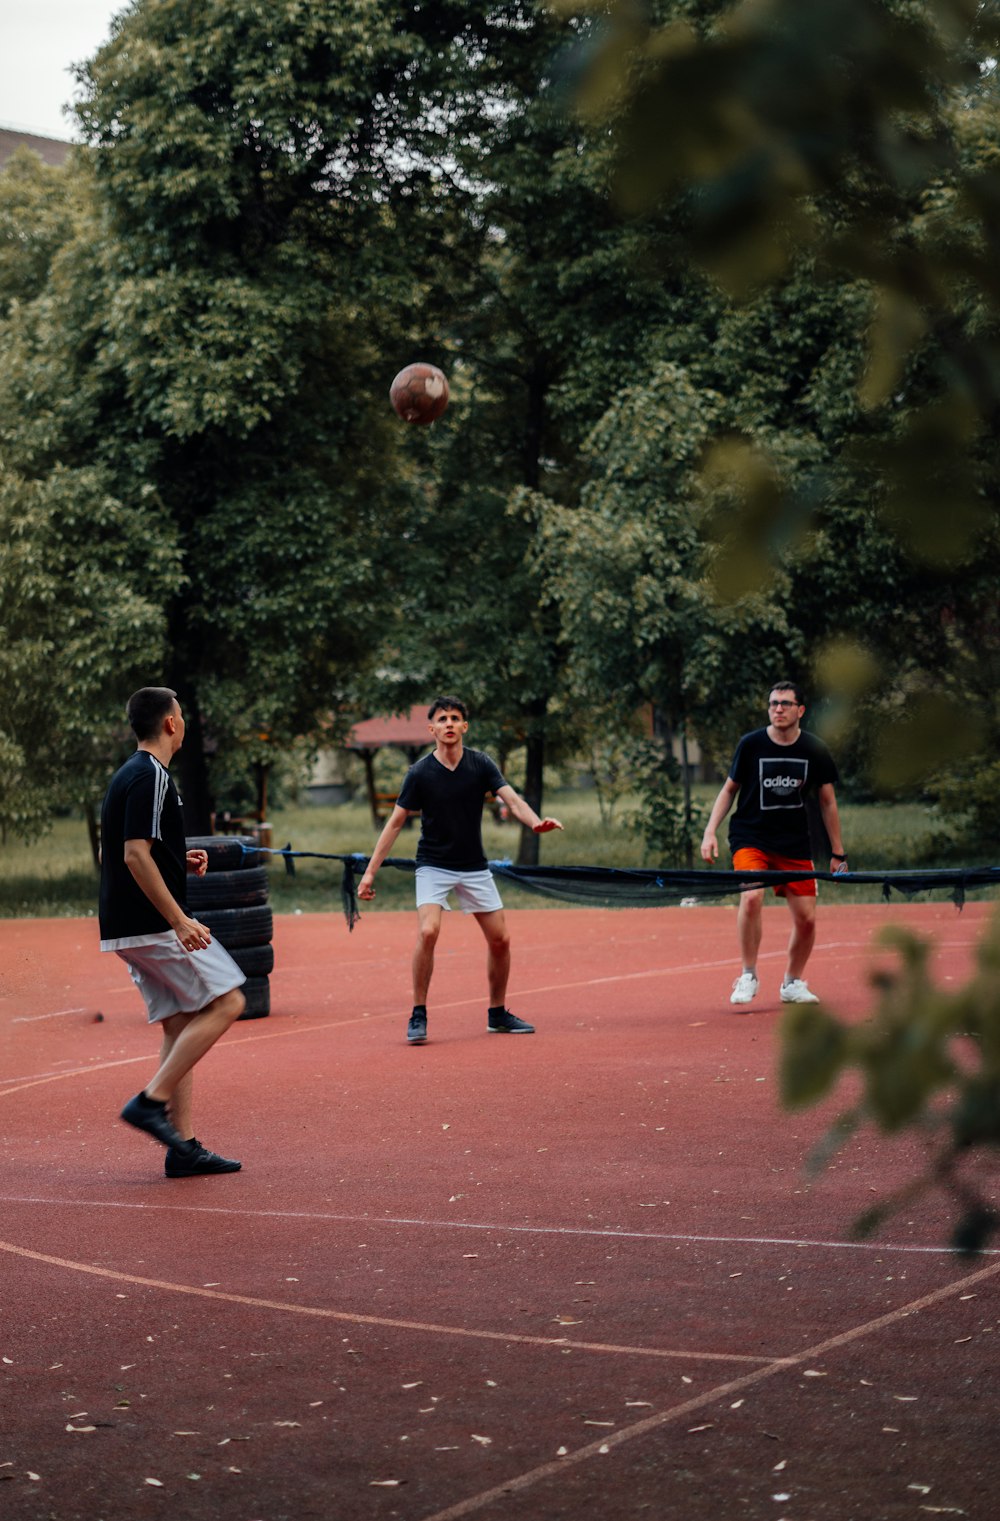 a group of young men playing a game of frisbee